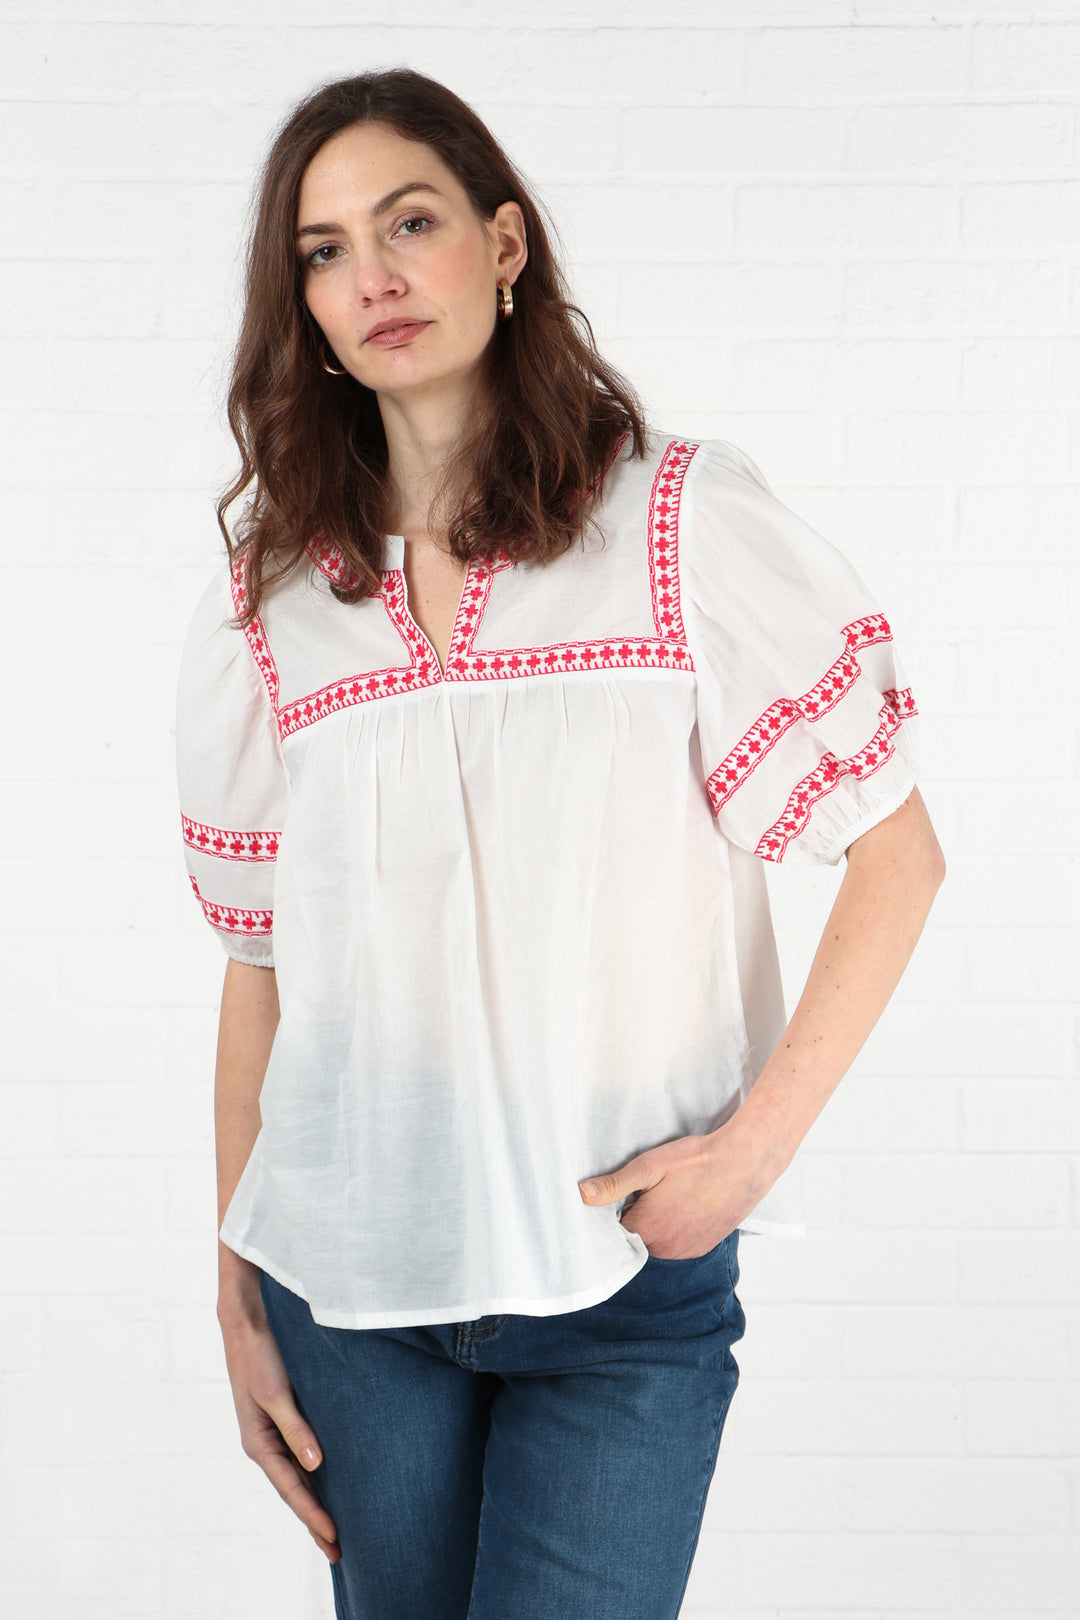 model wearing a short sleeved cotton blouse with red embroidery on the sleeves and neck area